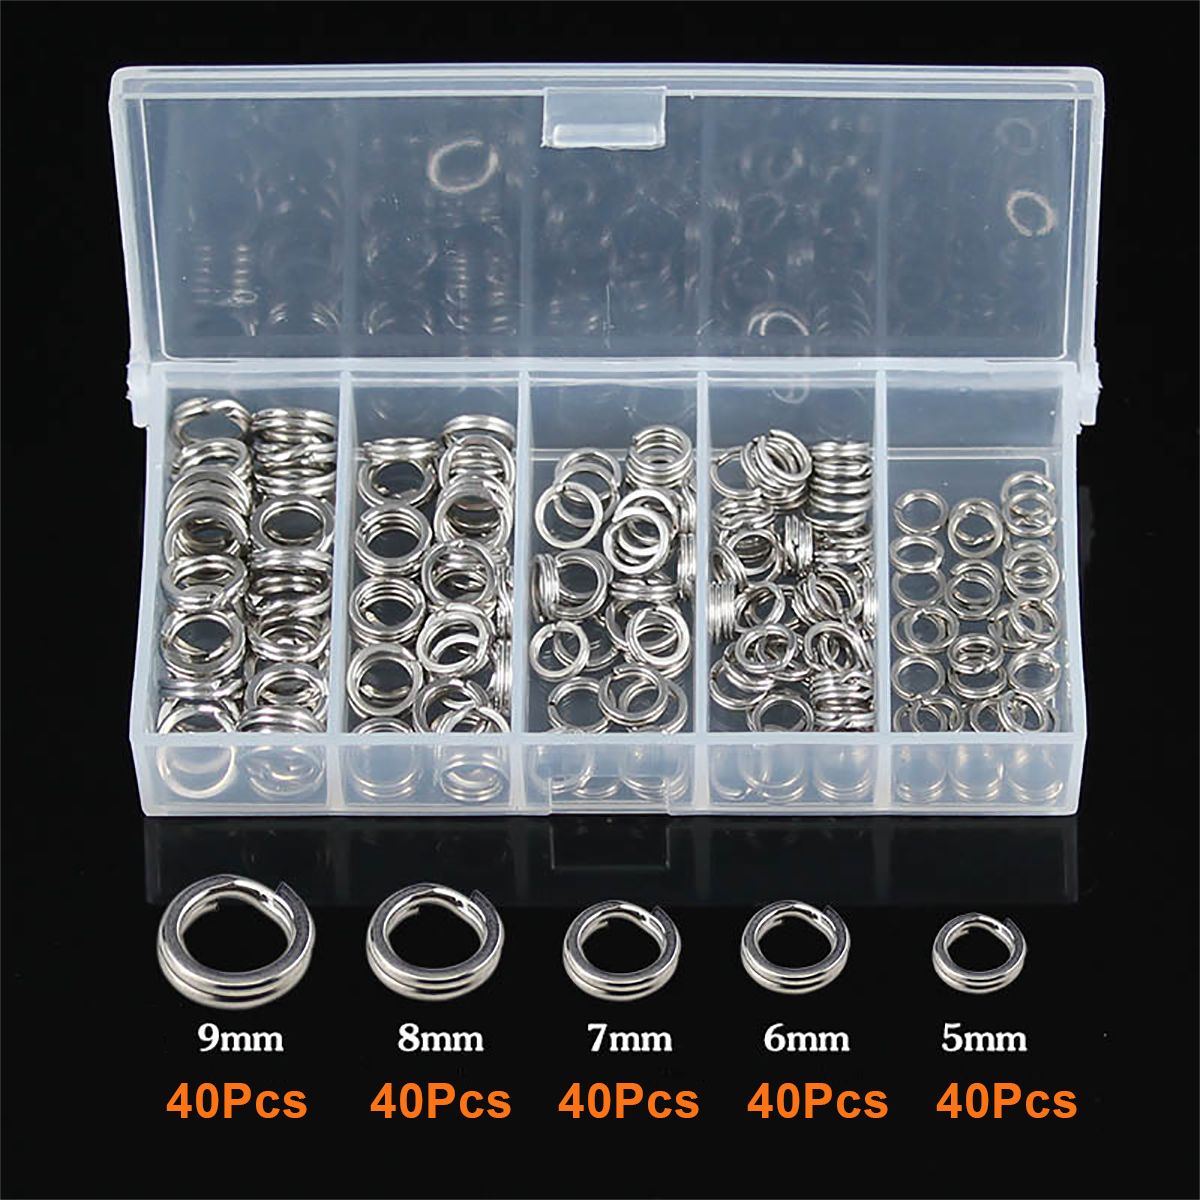 5-9mm-200Pcs-Fishing-Solid-Rings-Jigging-Loop-Double-Circle-Bait-Ring-Connector-1724222